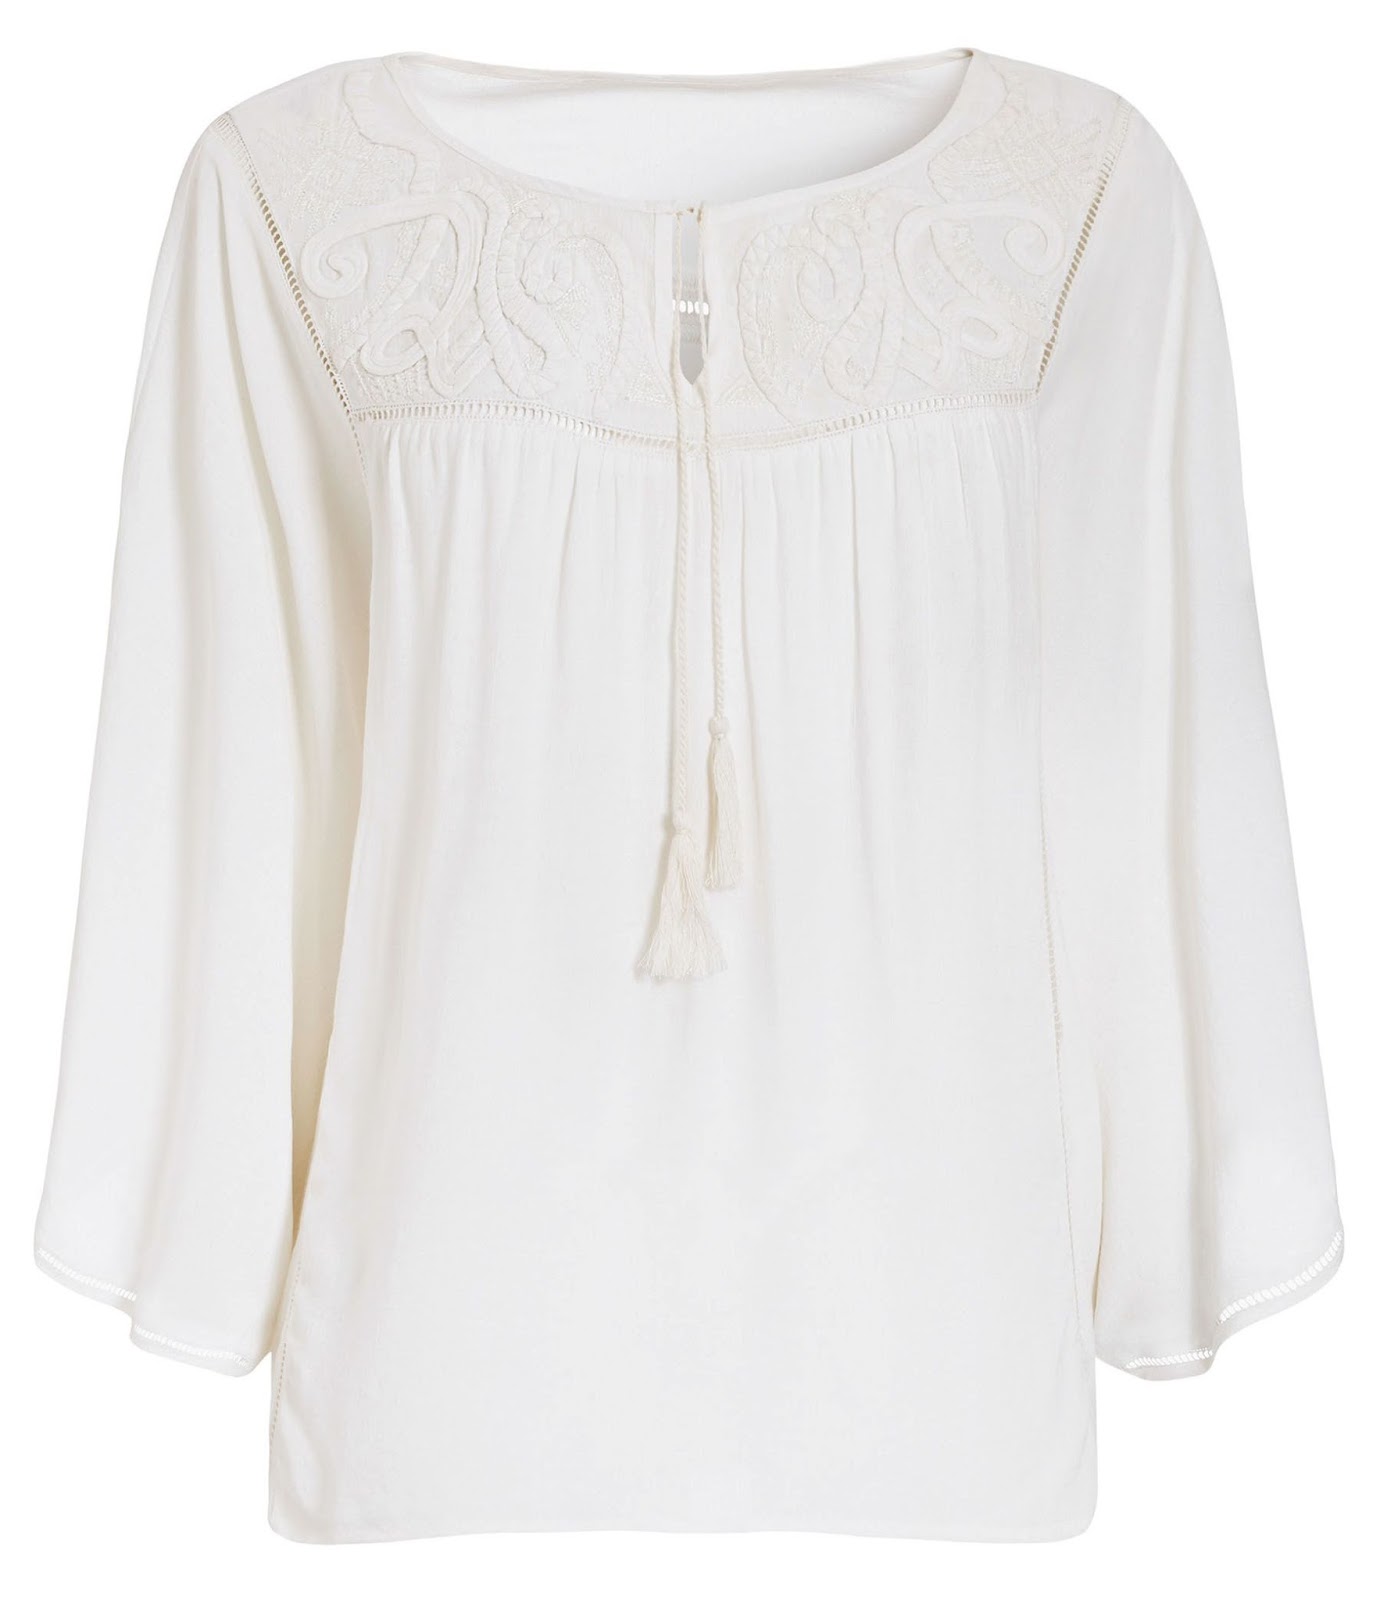 Summer Essential: The Peasant Top